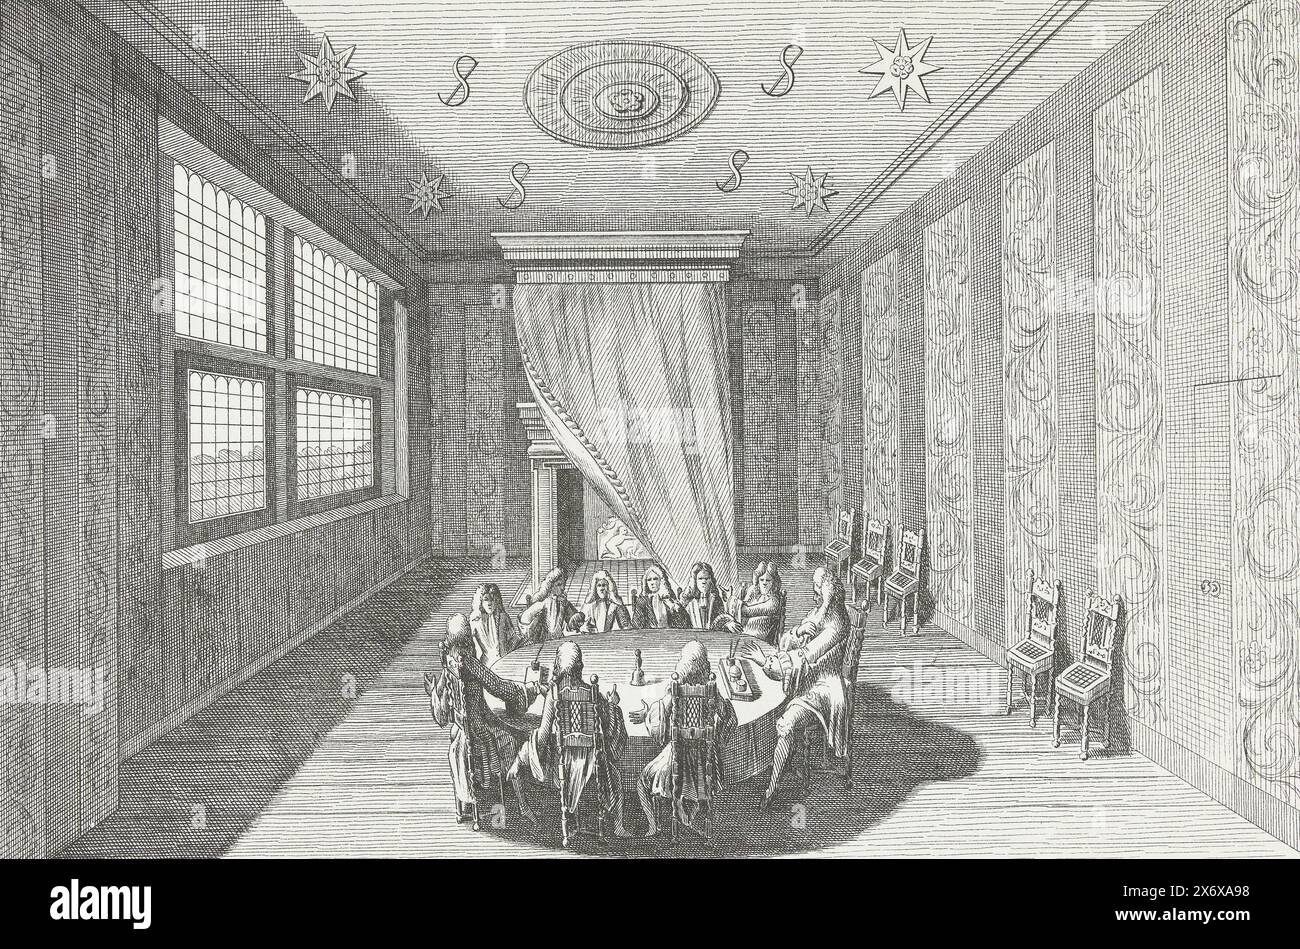 Reproduction of the print of the room where the peace was signed in the Huis ter Nieuburch in Rijswijk, 1697, Reproduction of the print of the room where the peace treaty was signed in the Huis ter Nieuburch in Rijswijk. A group of men seated at a round table. After a print in the series of 12 prints about the Huis ter Nieuburch in Rijswijk and the peace negotiations held there resulting in the Peace of Rijswijk concluded on September 20, 1697., print, print maker: Emrik & Binger, after print by: Jan van Vianen, Netherlands, 1877 - 1879, paper, height, 225 mm × width, 298 mm Stock Photo